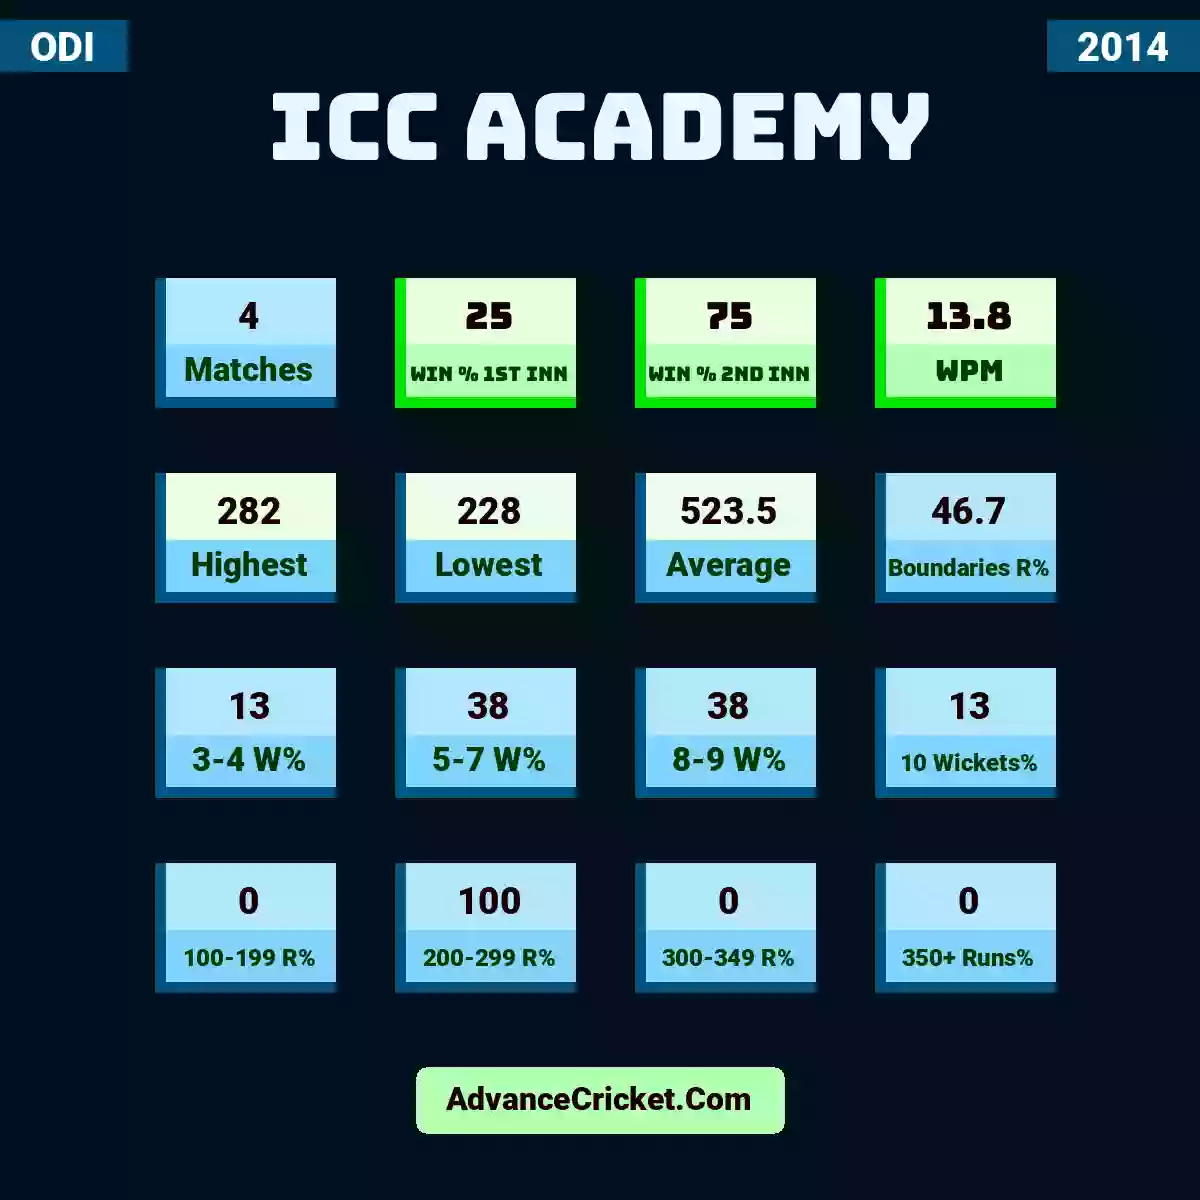 Image showing ICC Academy with Matches: 4, Win % 1st Inn: 25, Win % 2nd Inn: 75, WPM: 13.8, Highest: 282, Lowest: 228, Average: 523.5, Boundaries R%: 46.7, 3-4 W%: 13, 5-7 W%: 38, 8-9 W%: 38, 10 Wickets%: 13, 100-199 R%: 0, 200-299 R%: 100, 300-349 R%: 0, 350+ Runs%: 0.